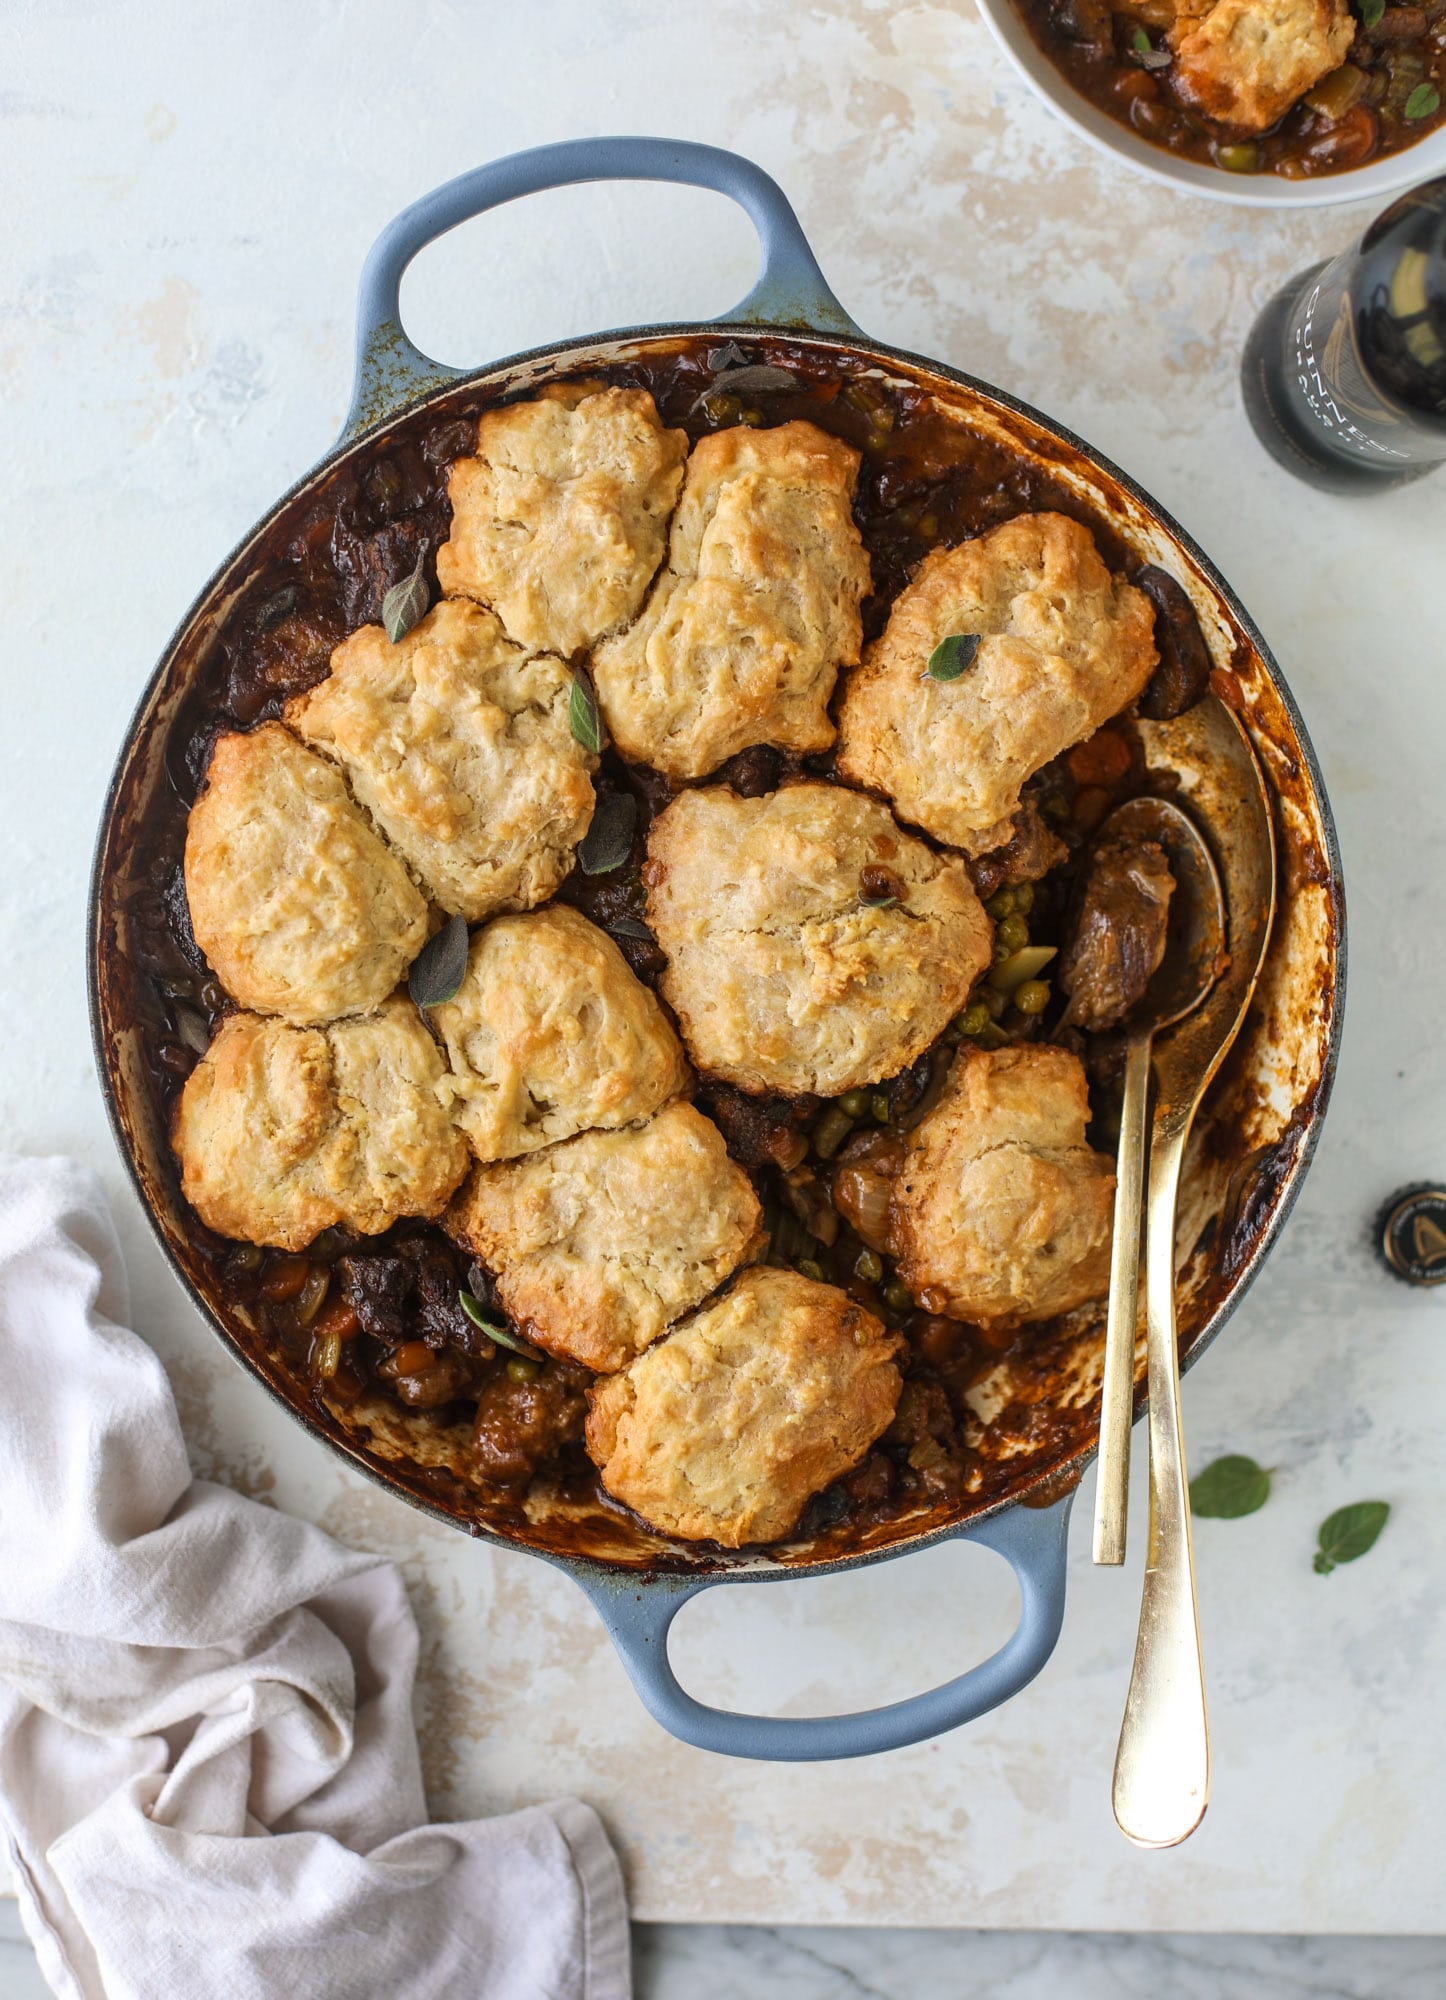 11 of my favorite Saint Patrick's Day recipes are here, like soda bread with salted honey butter and guinness short ribs with cauliflower mash. I howsweeteats.com #stpatricksday #recipes